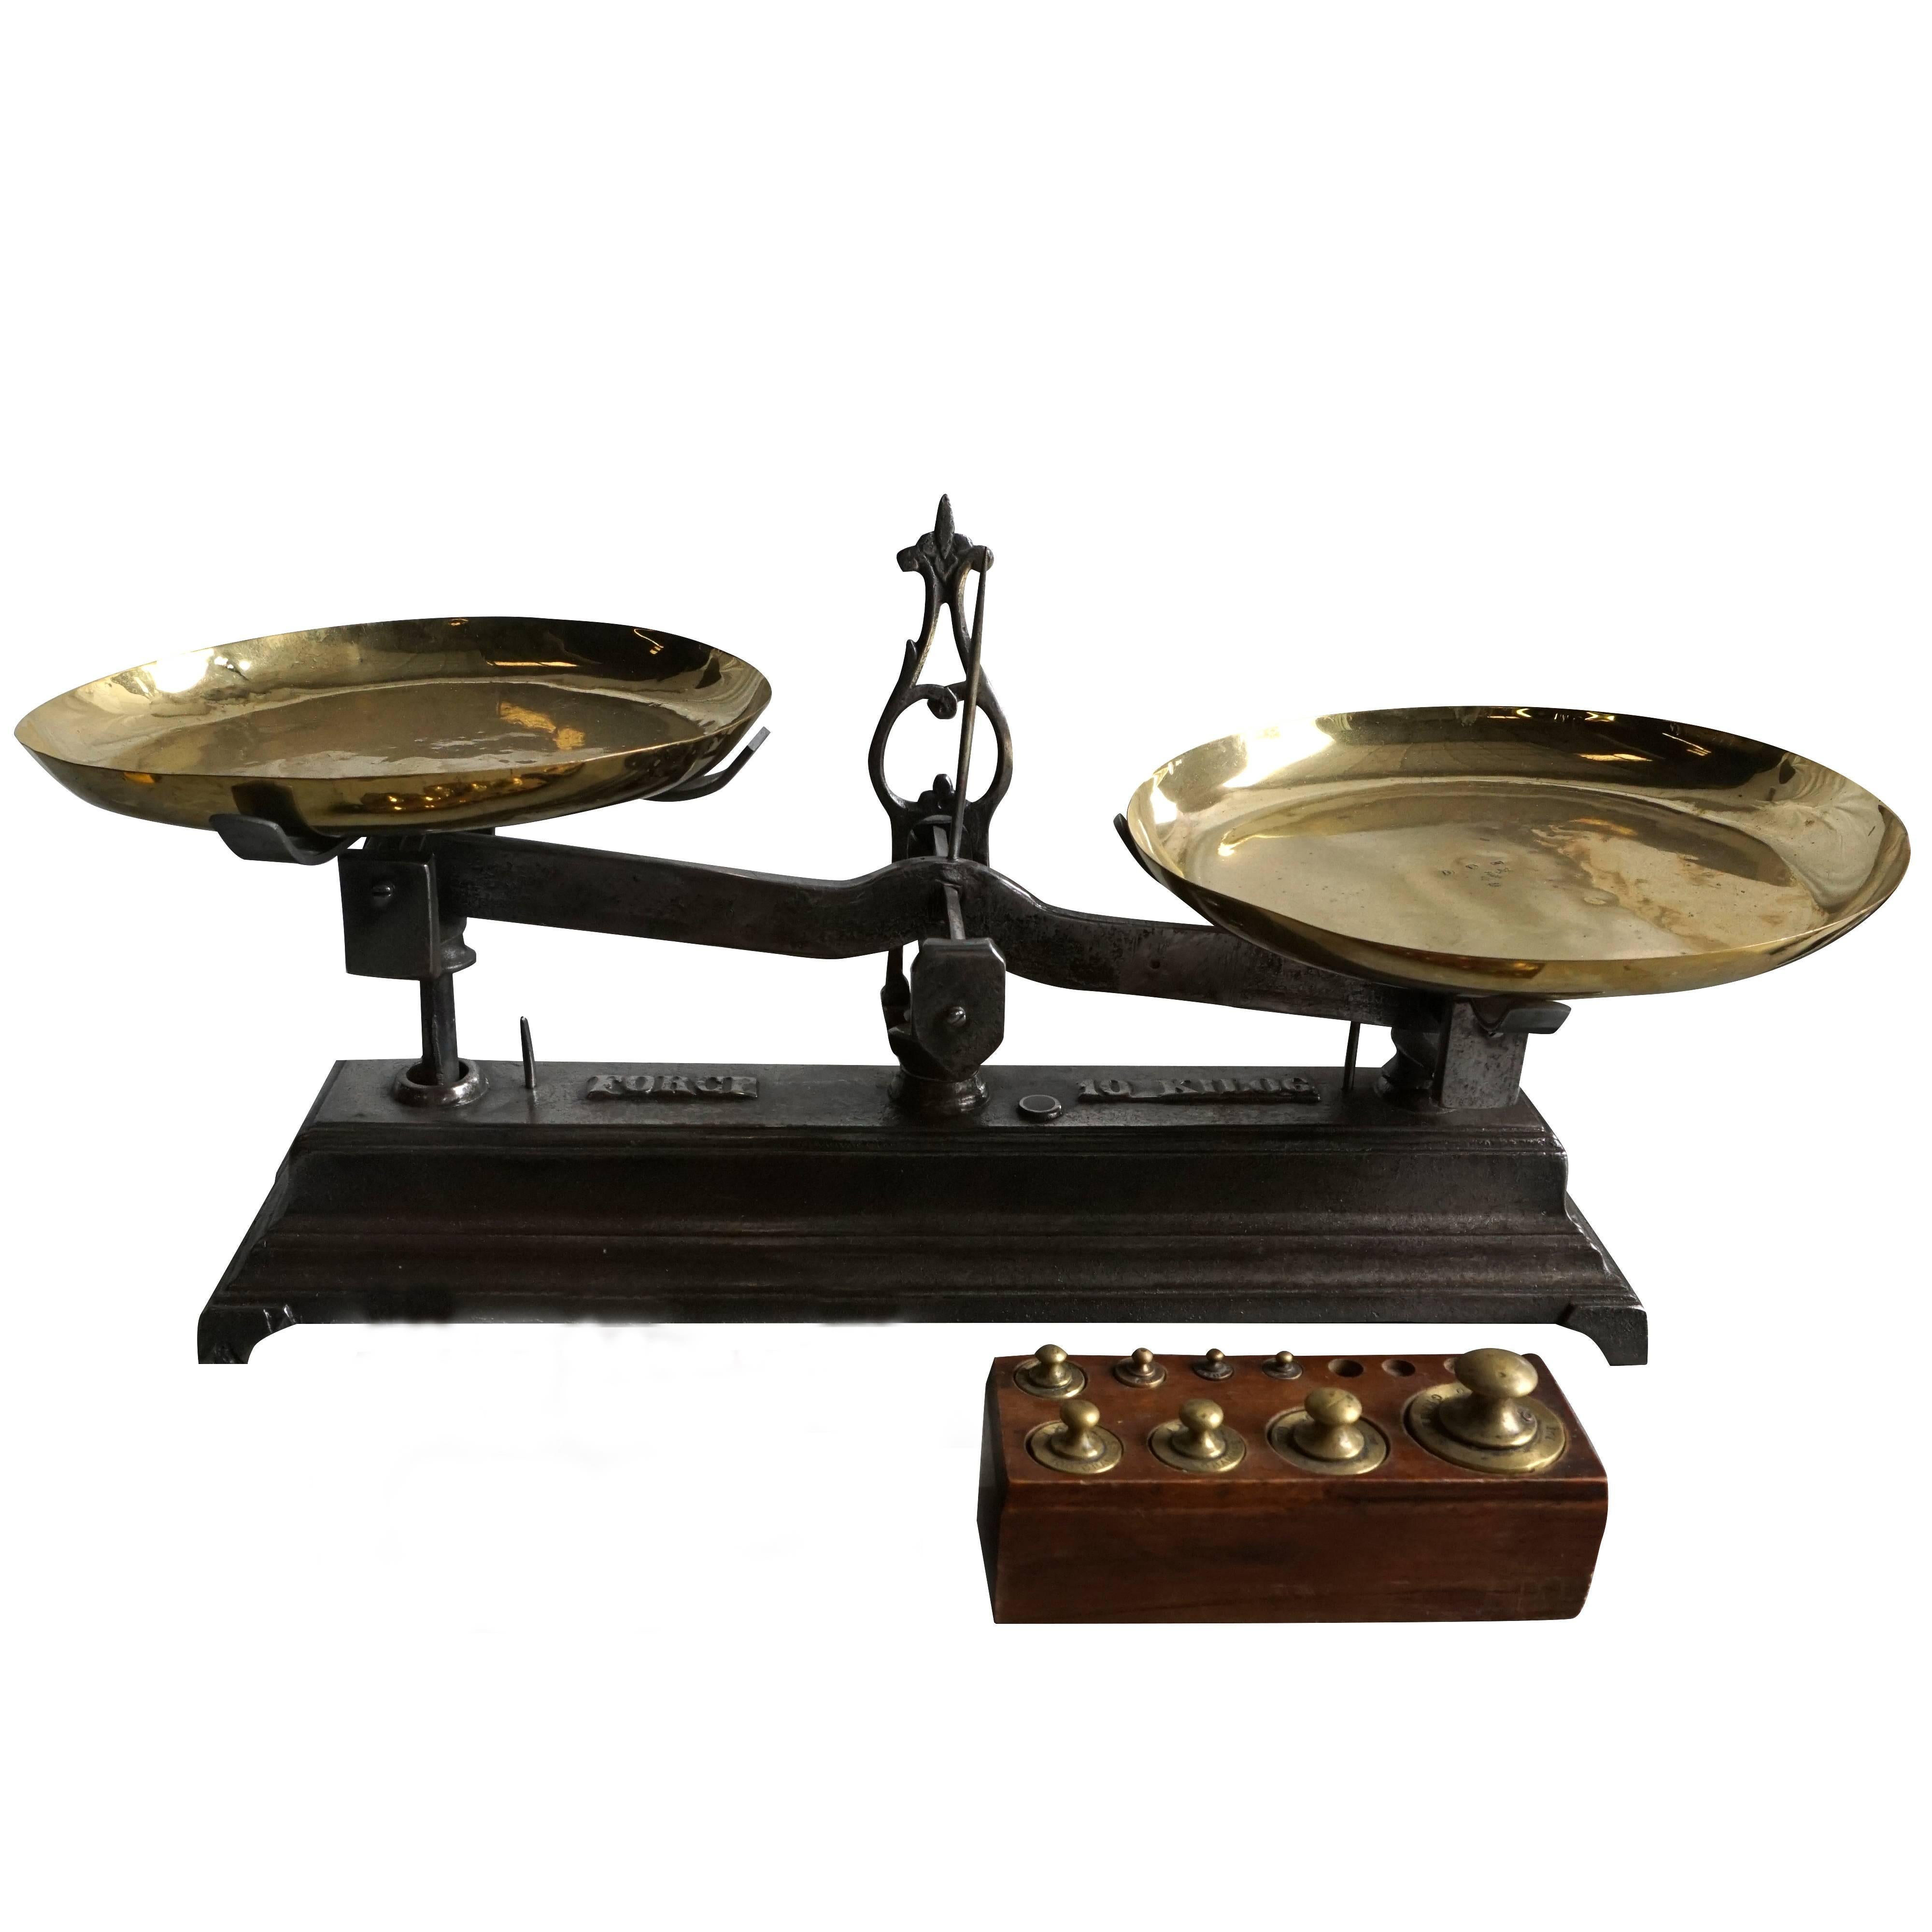 Mid-19th century, an intricately detailed scale with brass plates. The top of the scale it says 